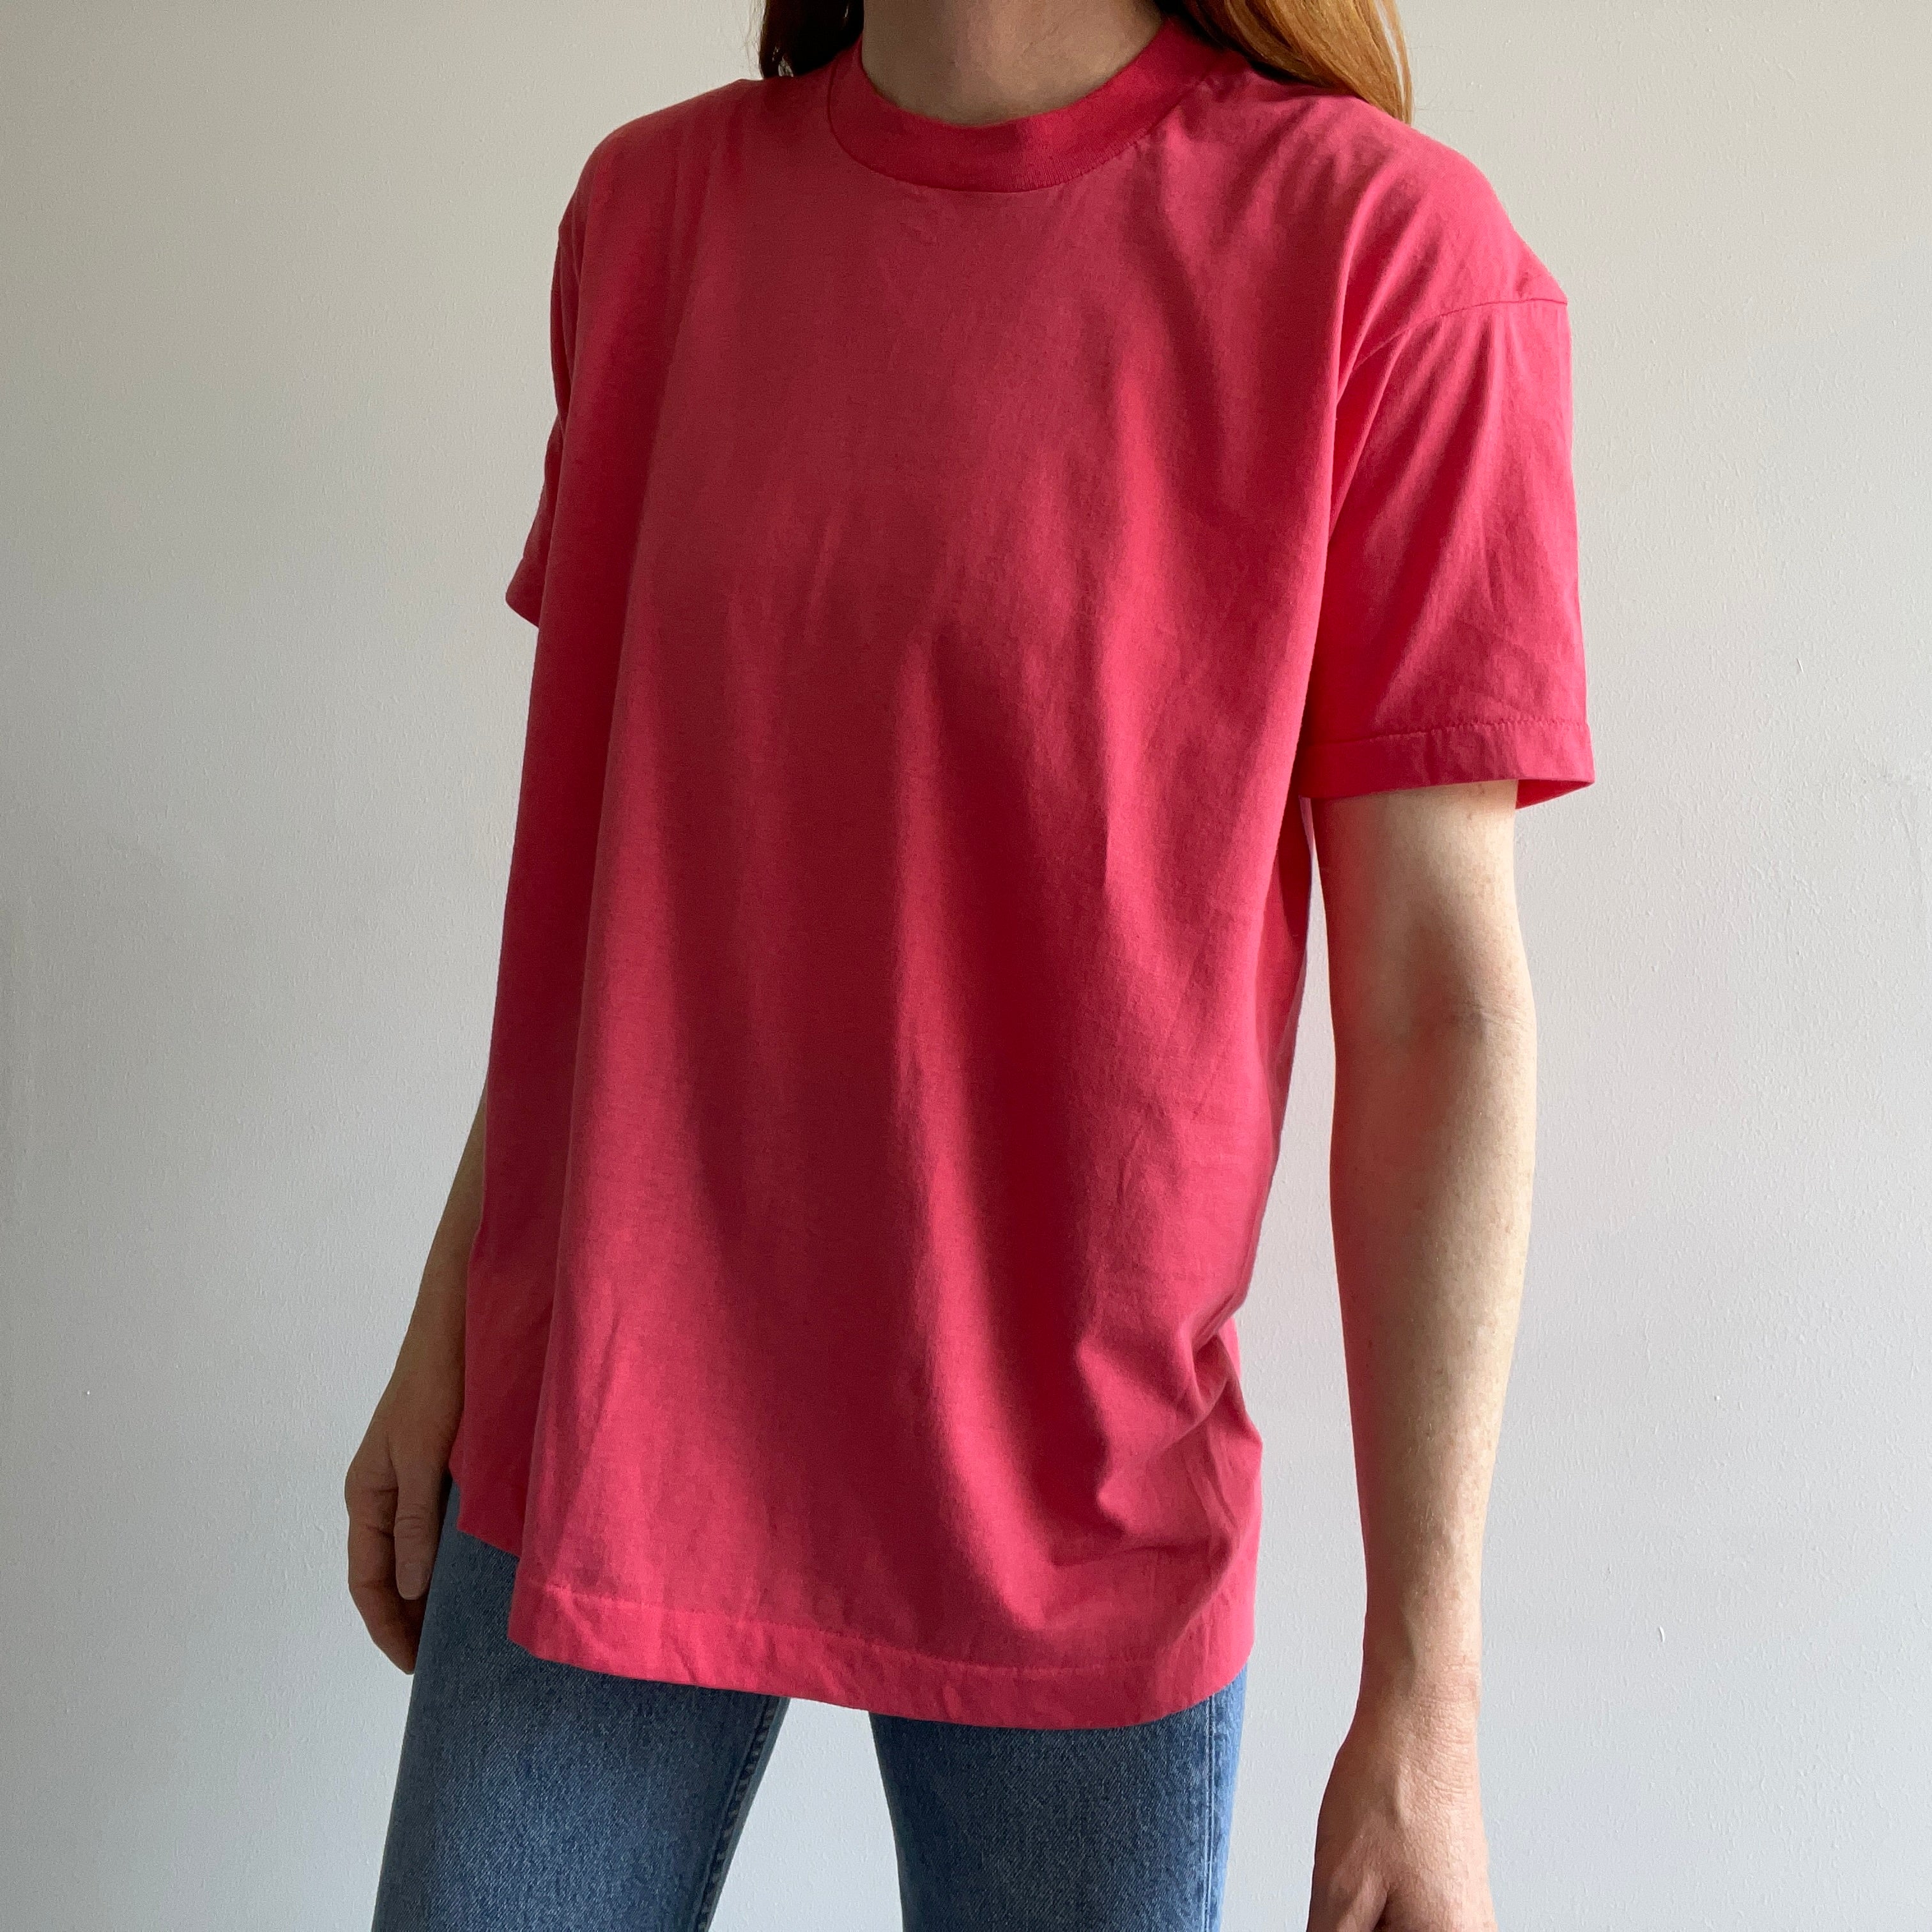 1980s Salmon Pink Never? Barely? Worn T-Shirt by Screen Stars